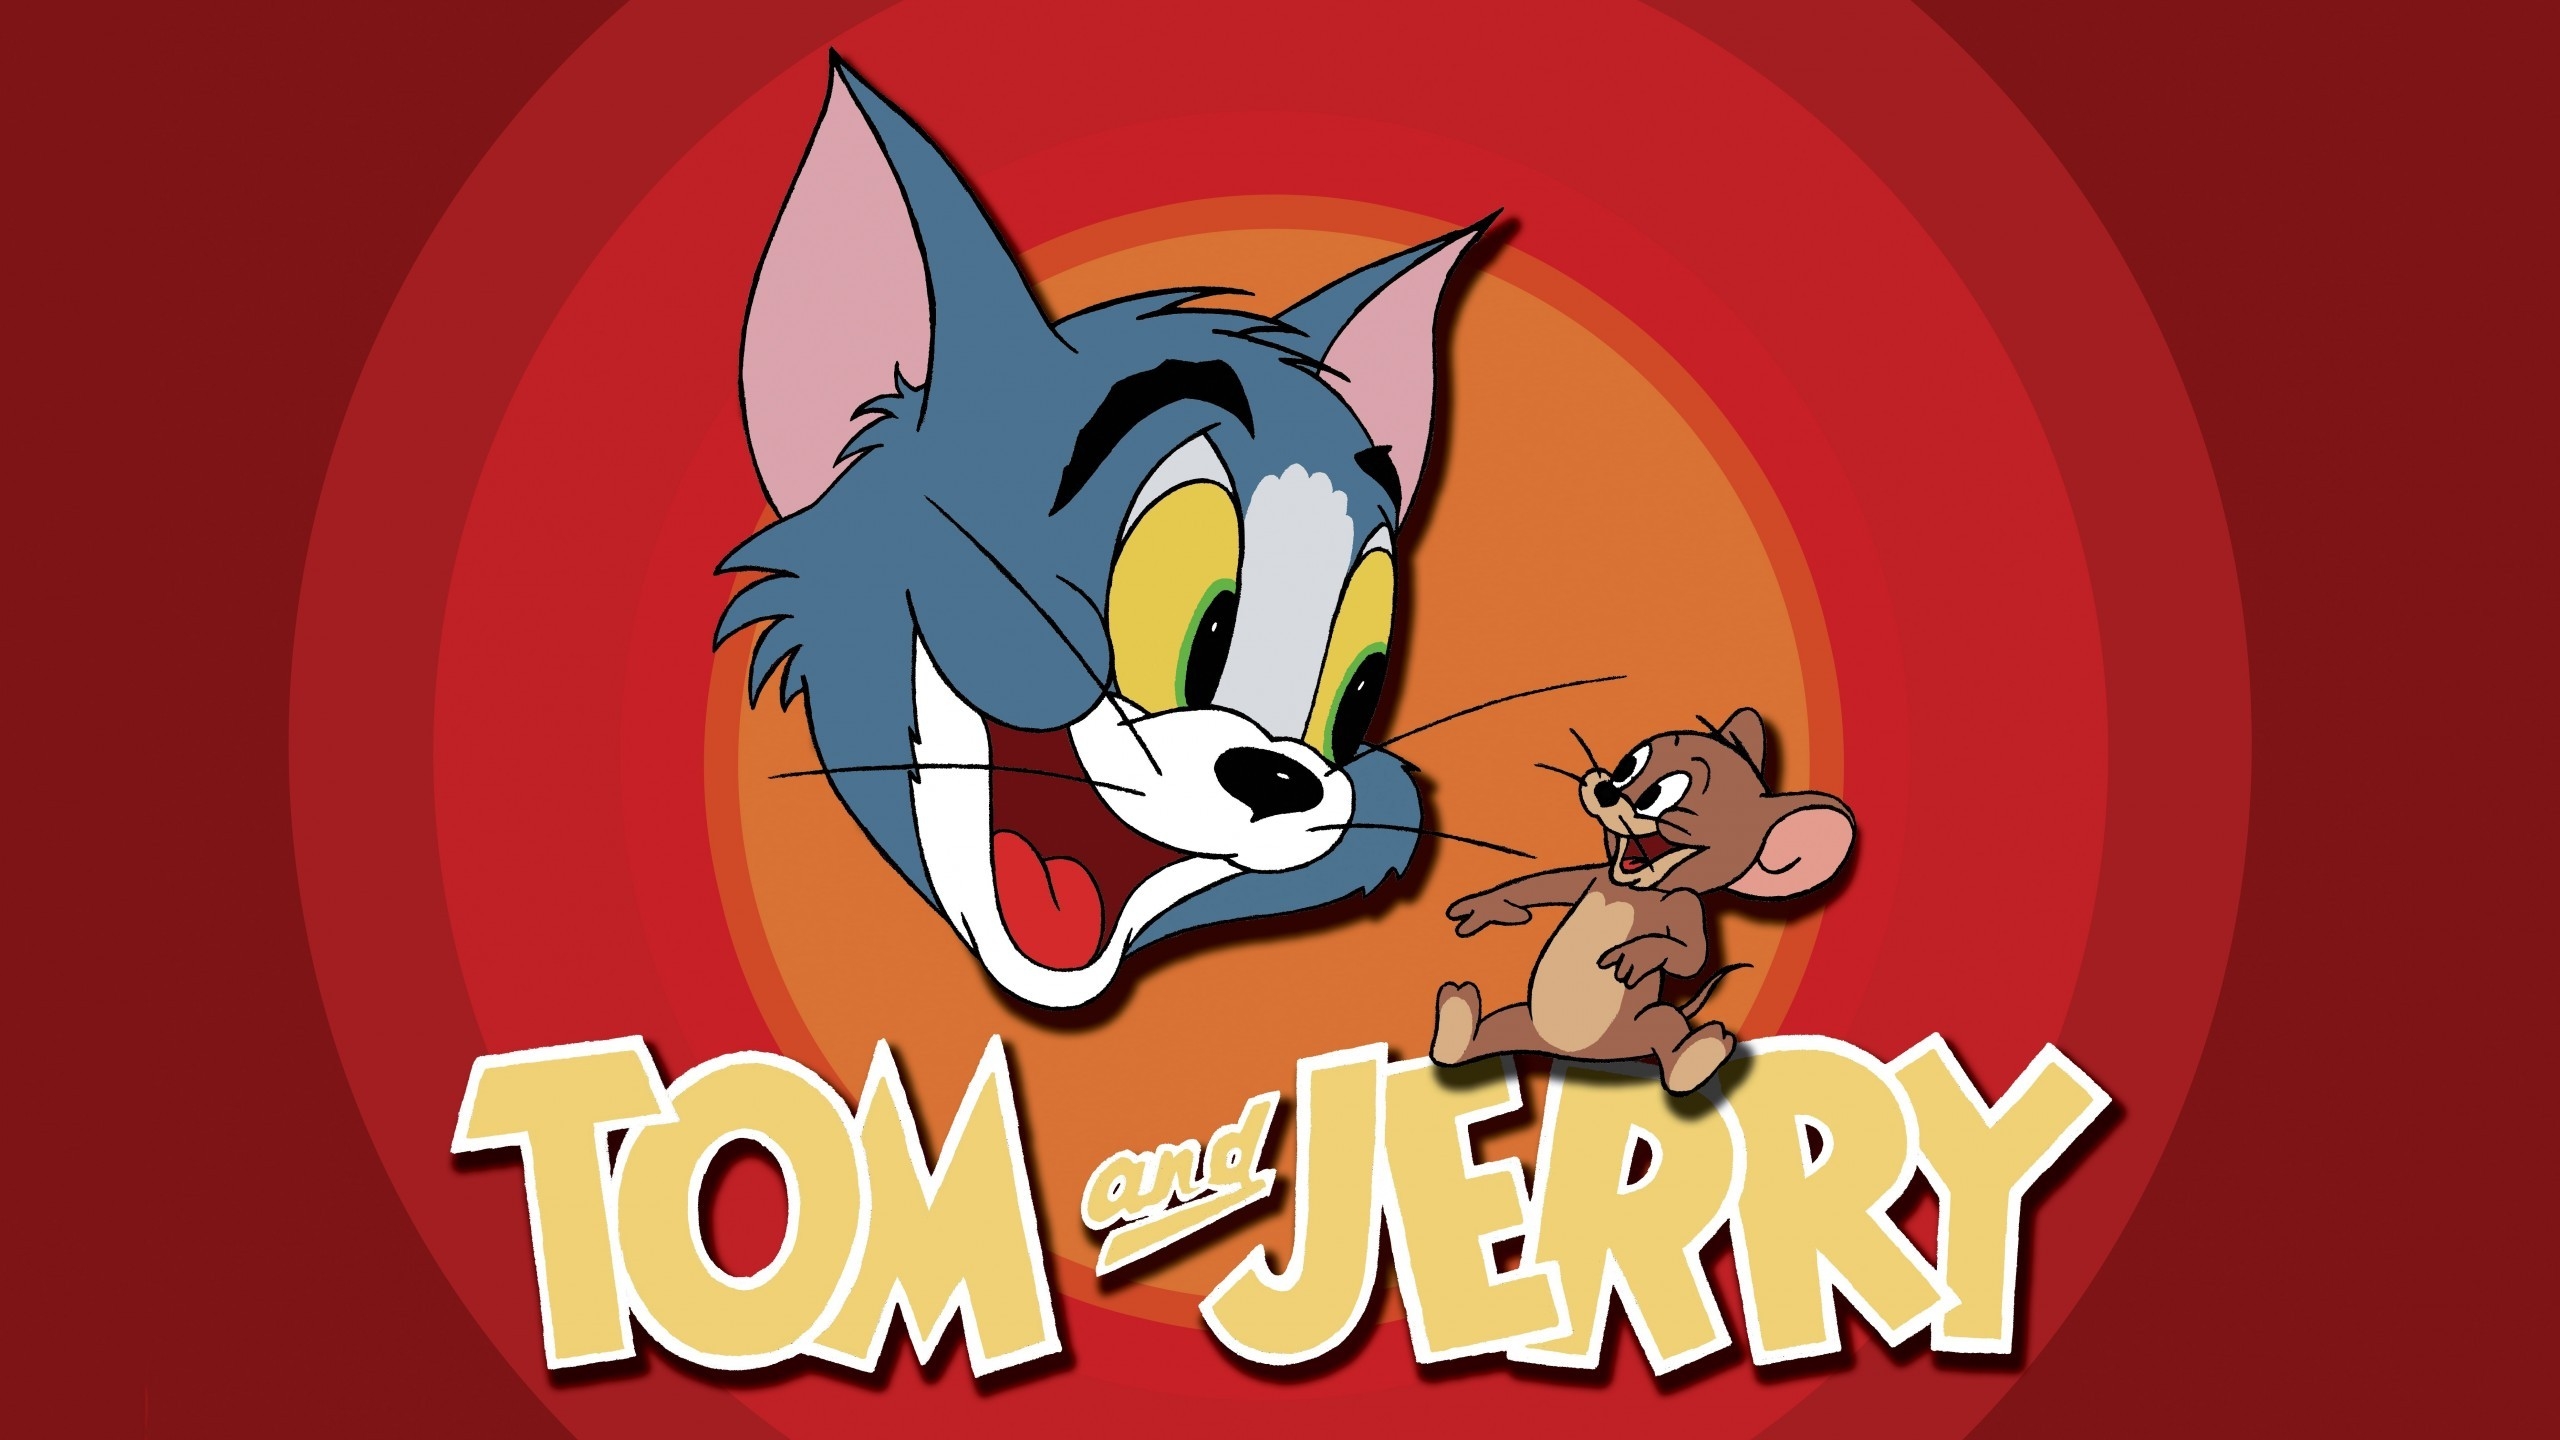 Tom and Jerry for 2560x1440 HDTV resolution